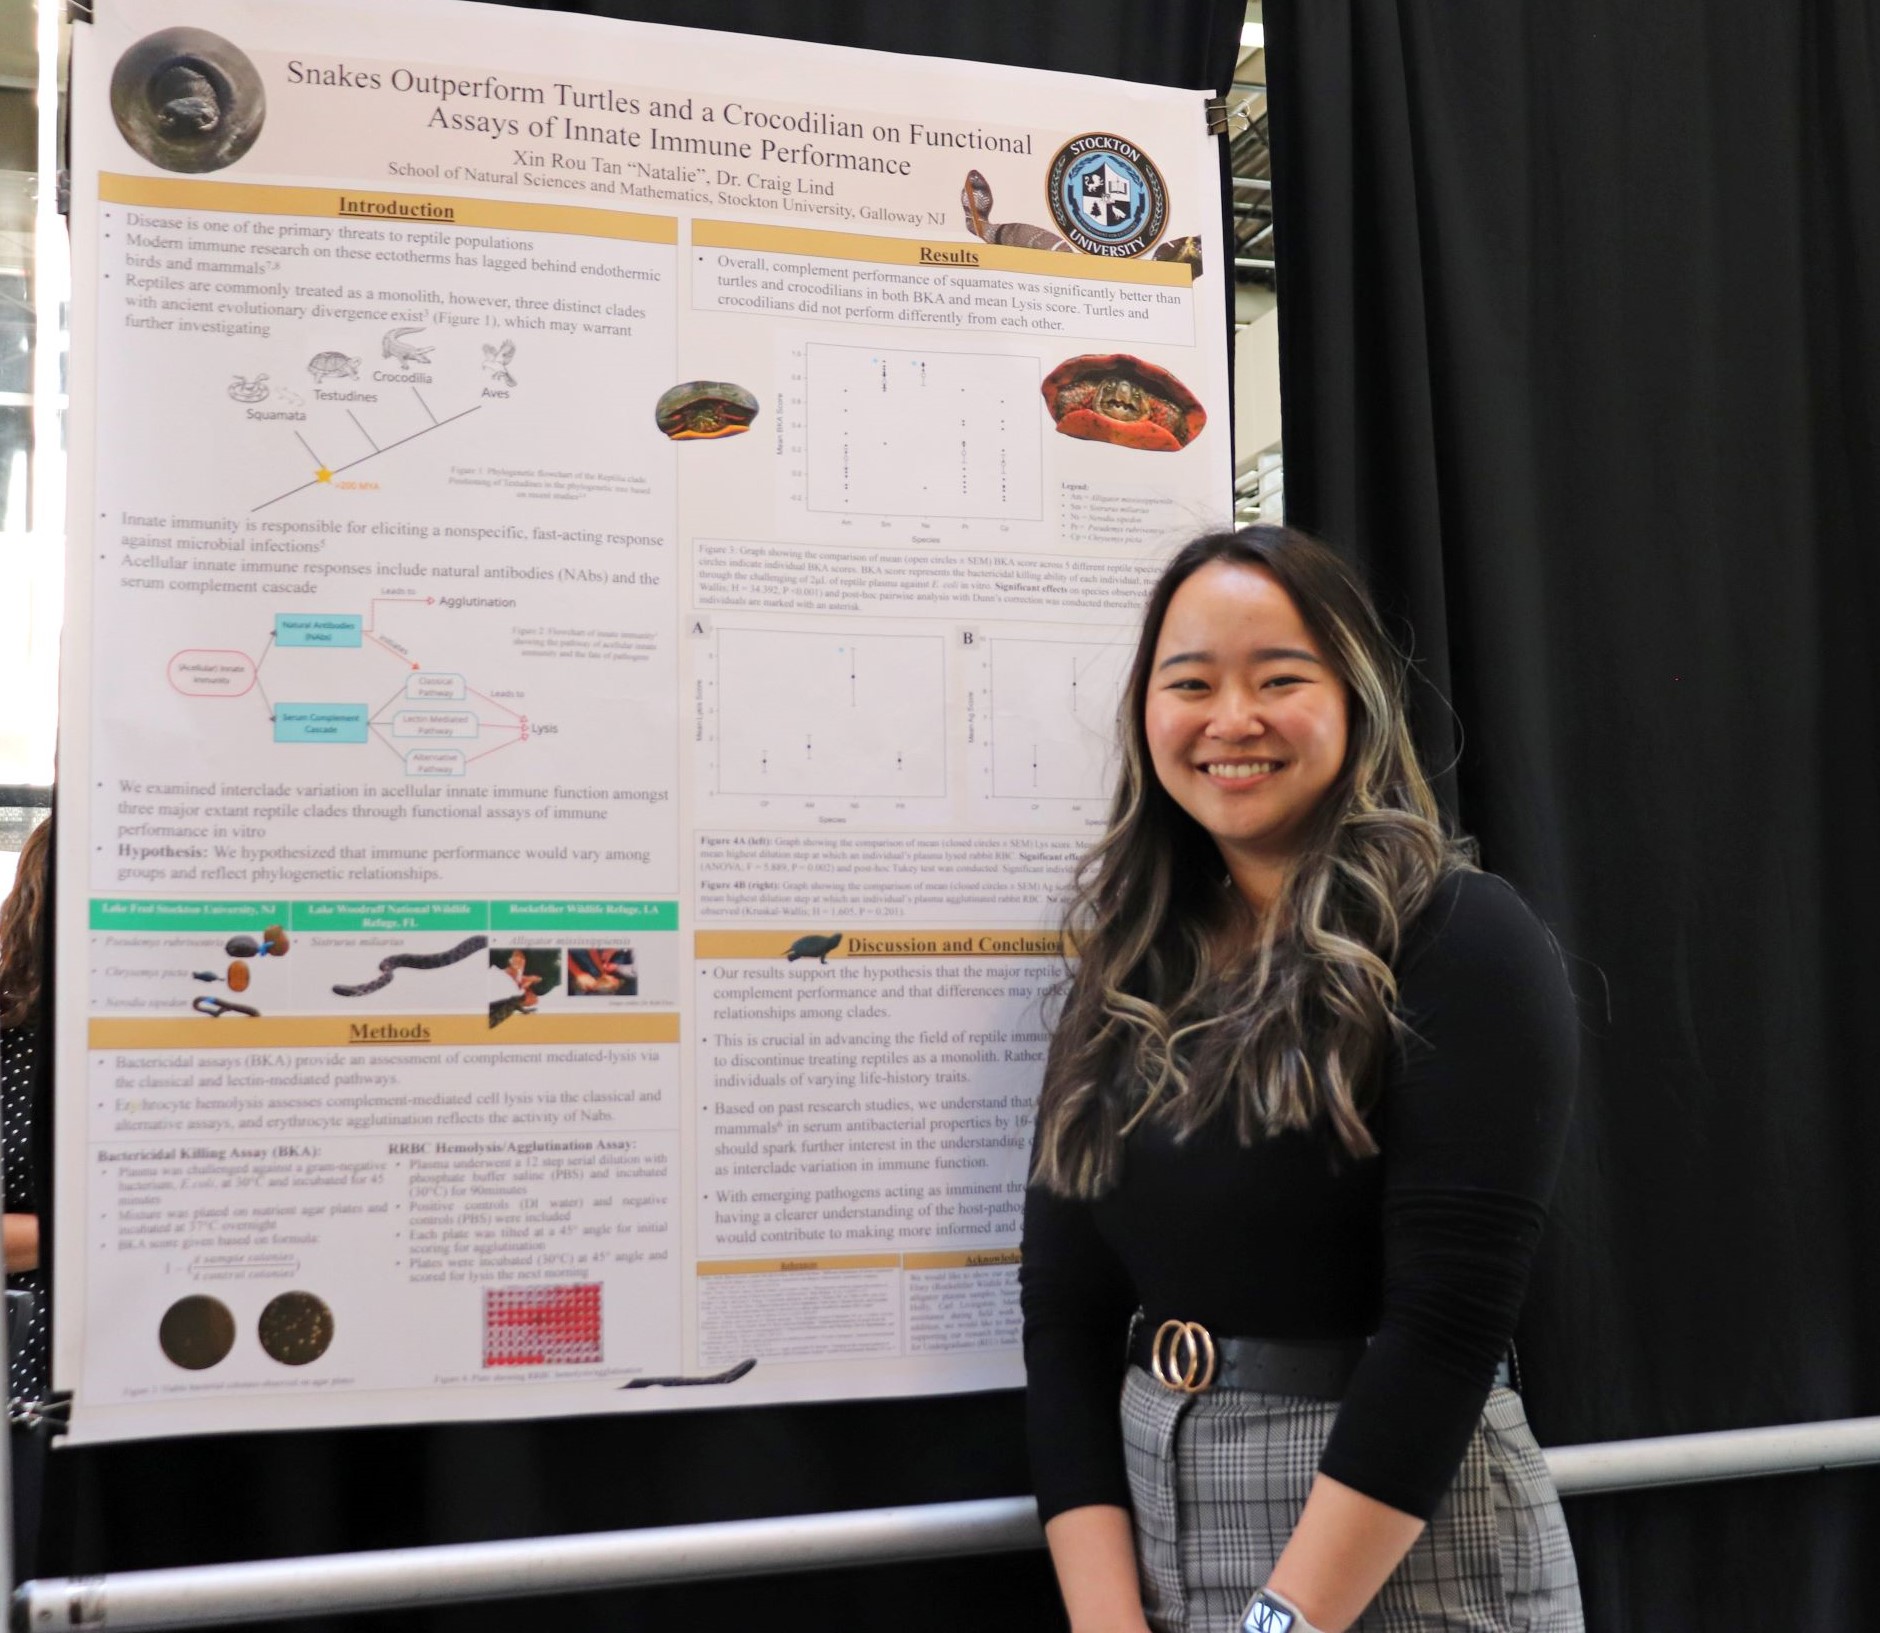 Xin Rou "Natalie" Tan was the third place winner in the NAMS Symposium on April 22. She stands in front of her project.